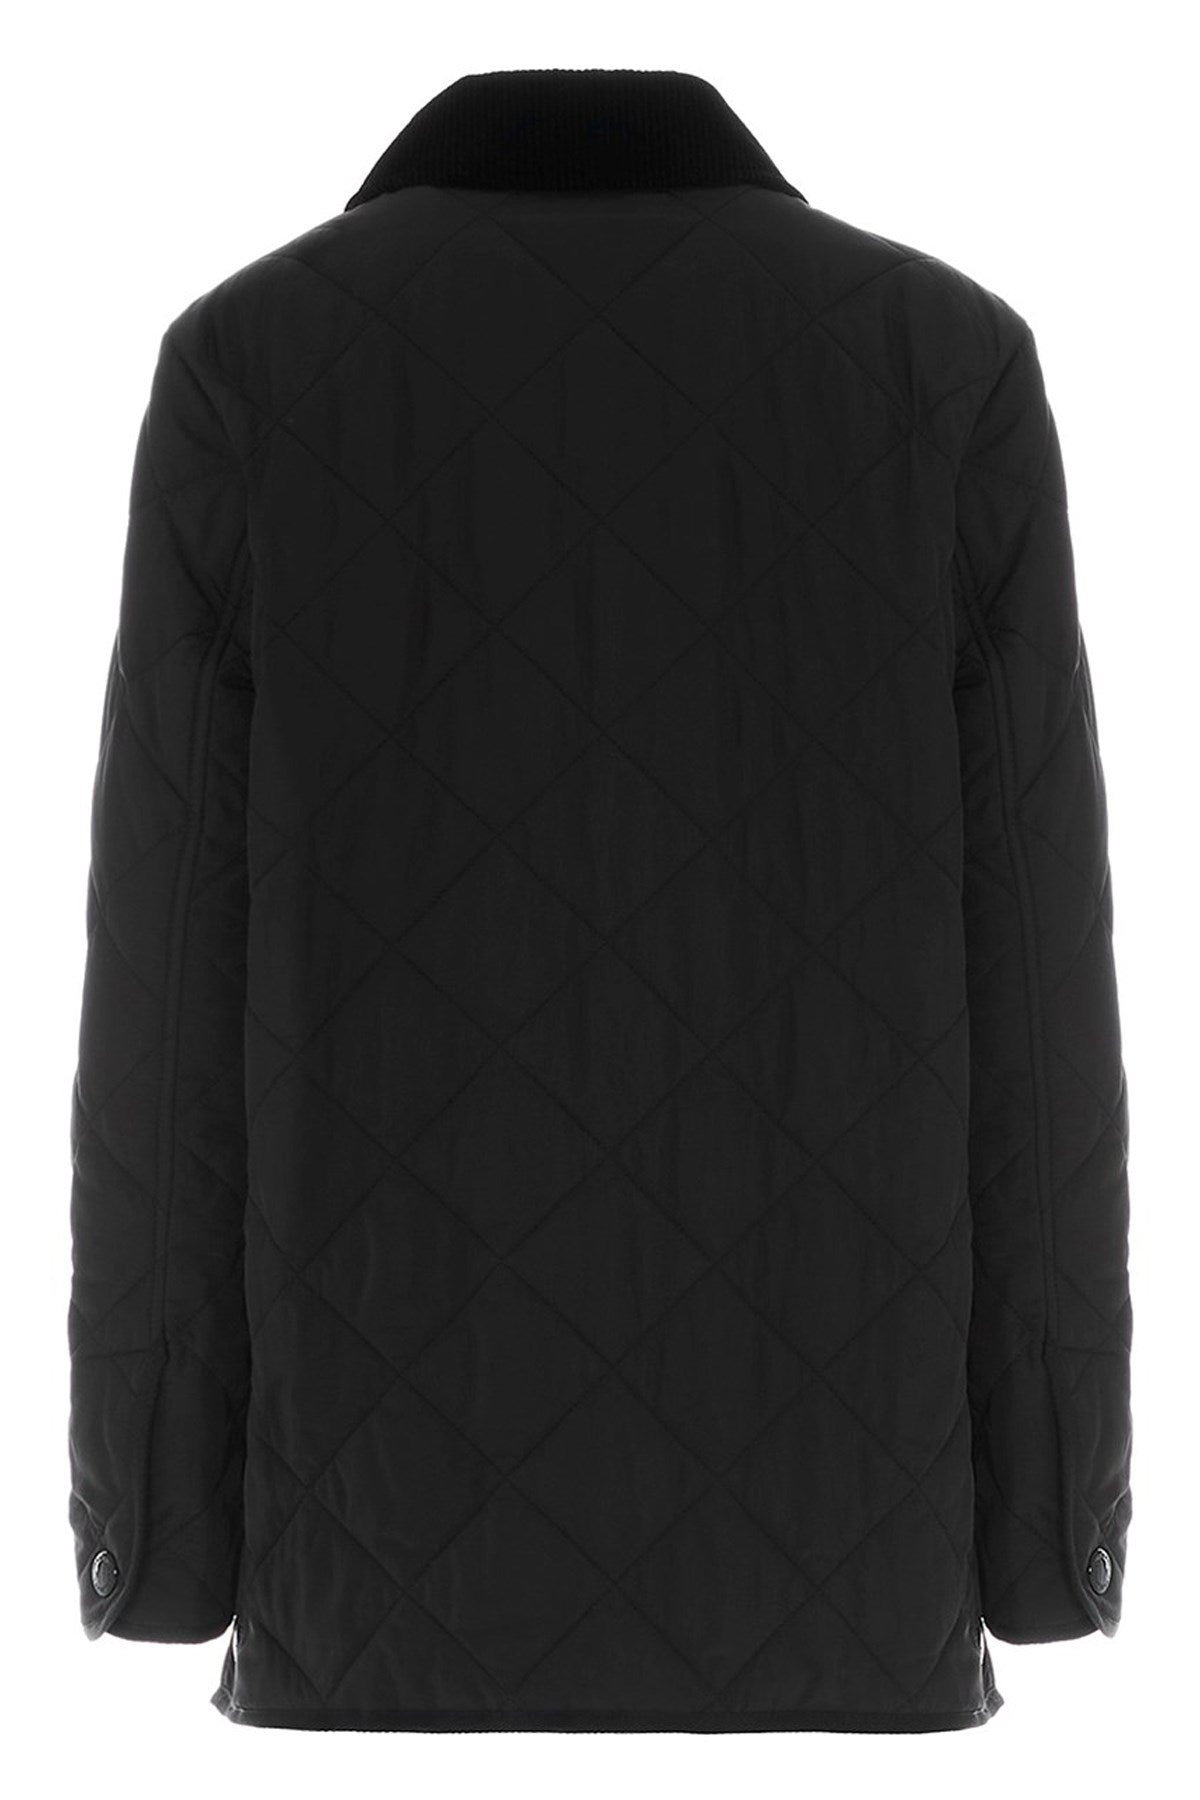 Burberry Women Quilted Jacket 'Cotswold' - 2